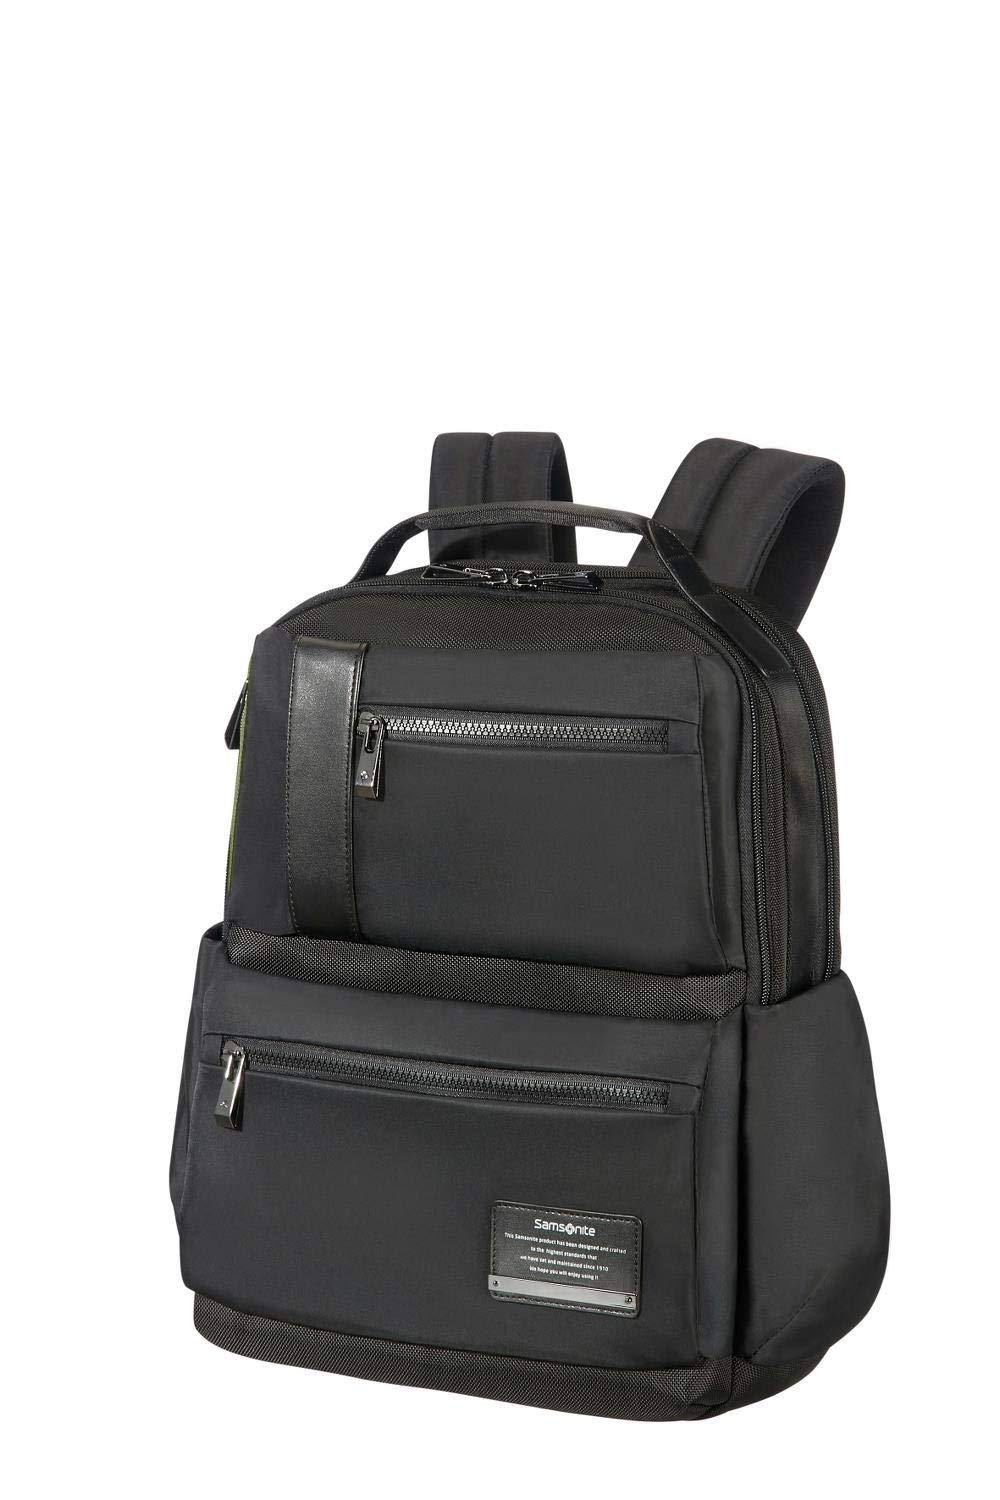 Samsonite Xenon 2 Laptop Checkpoint Friendly Laptop Backpack – Luggage  Online